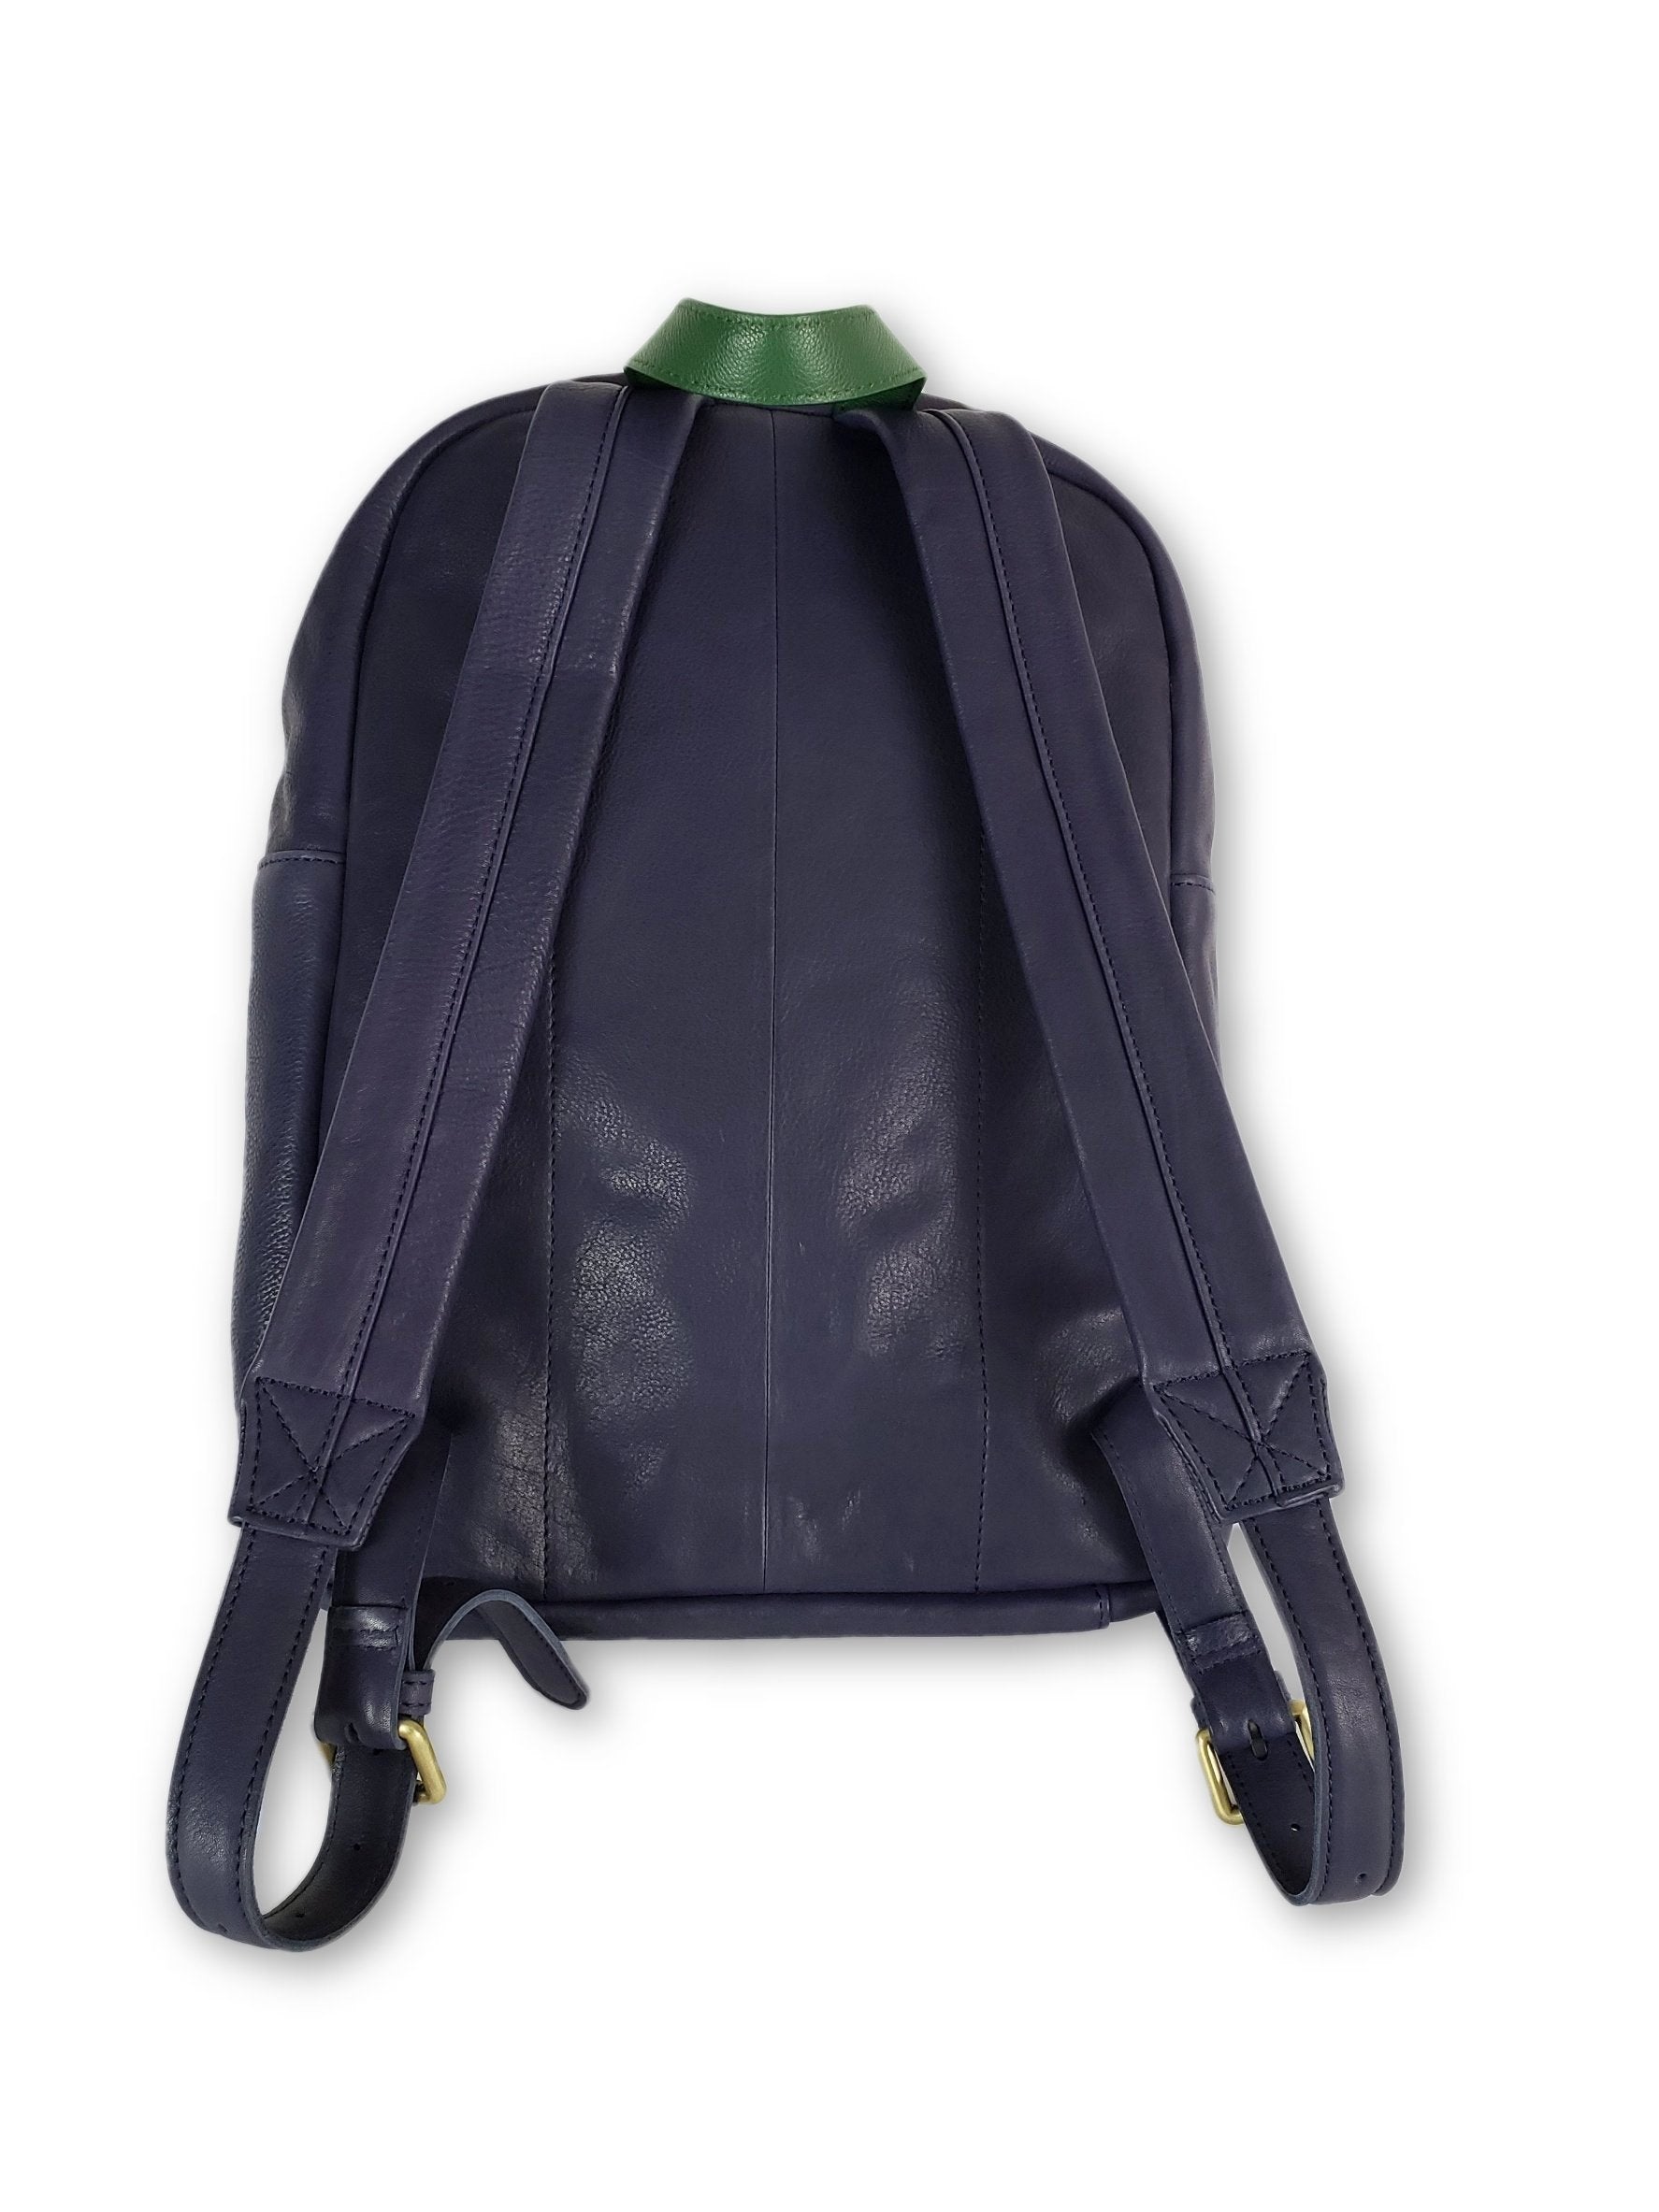 Purple Leather Striped Backpack